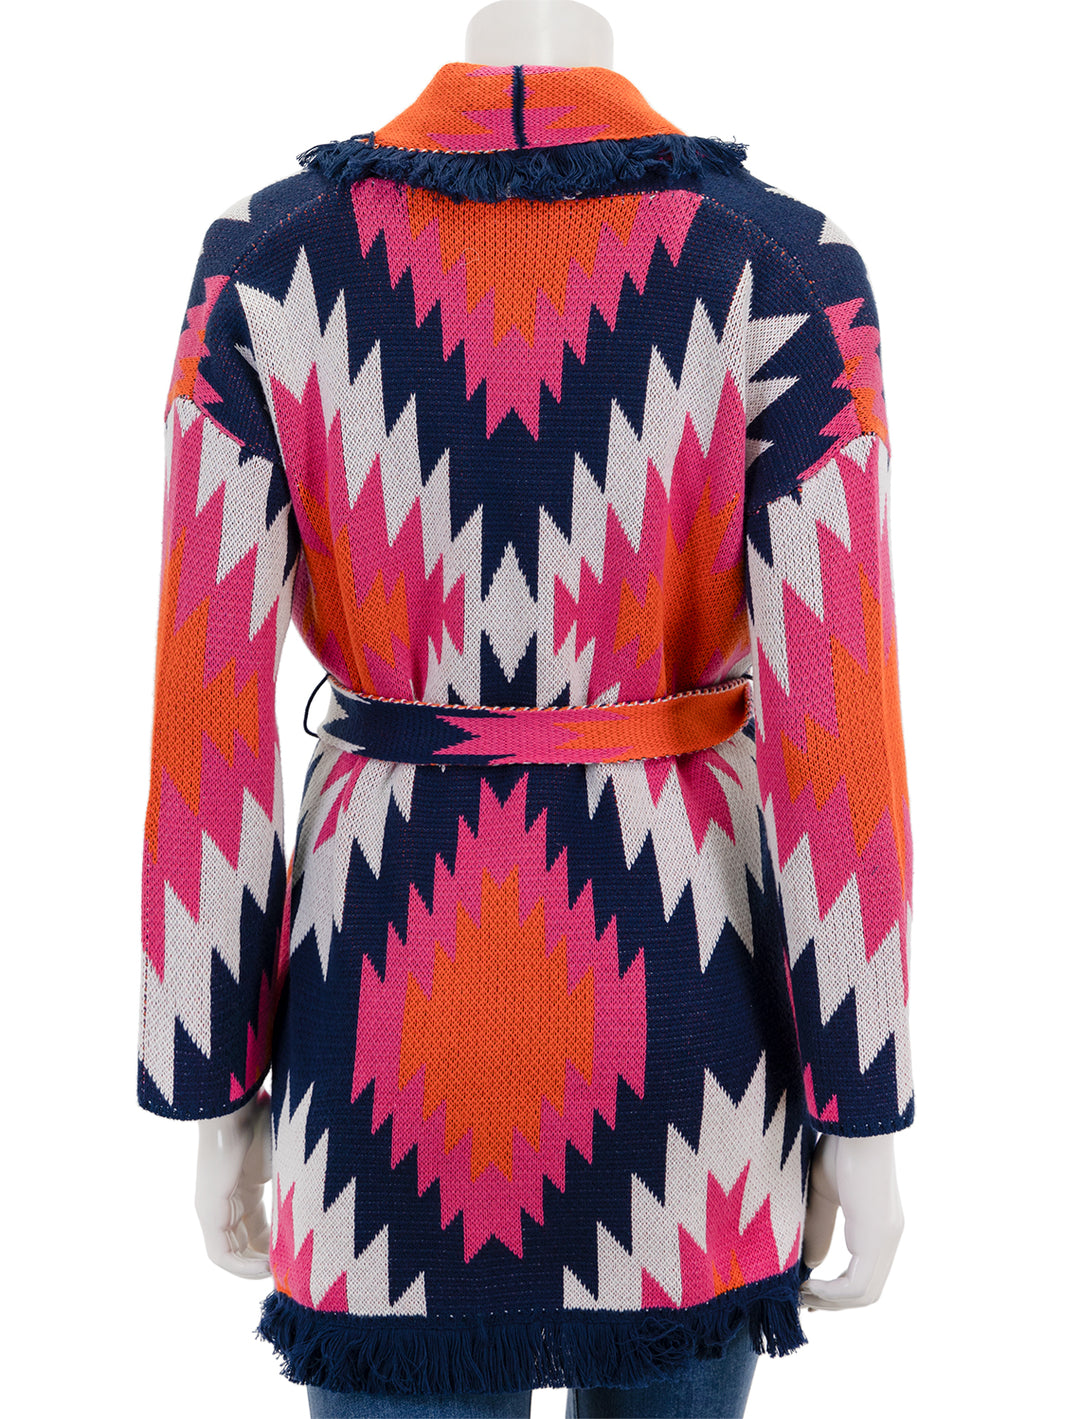 Back view of Vilagallo's Wrap Cardigan in Pink and Navy Multi.